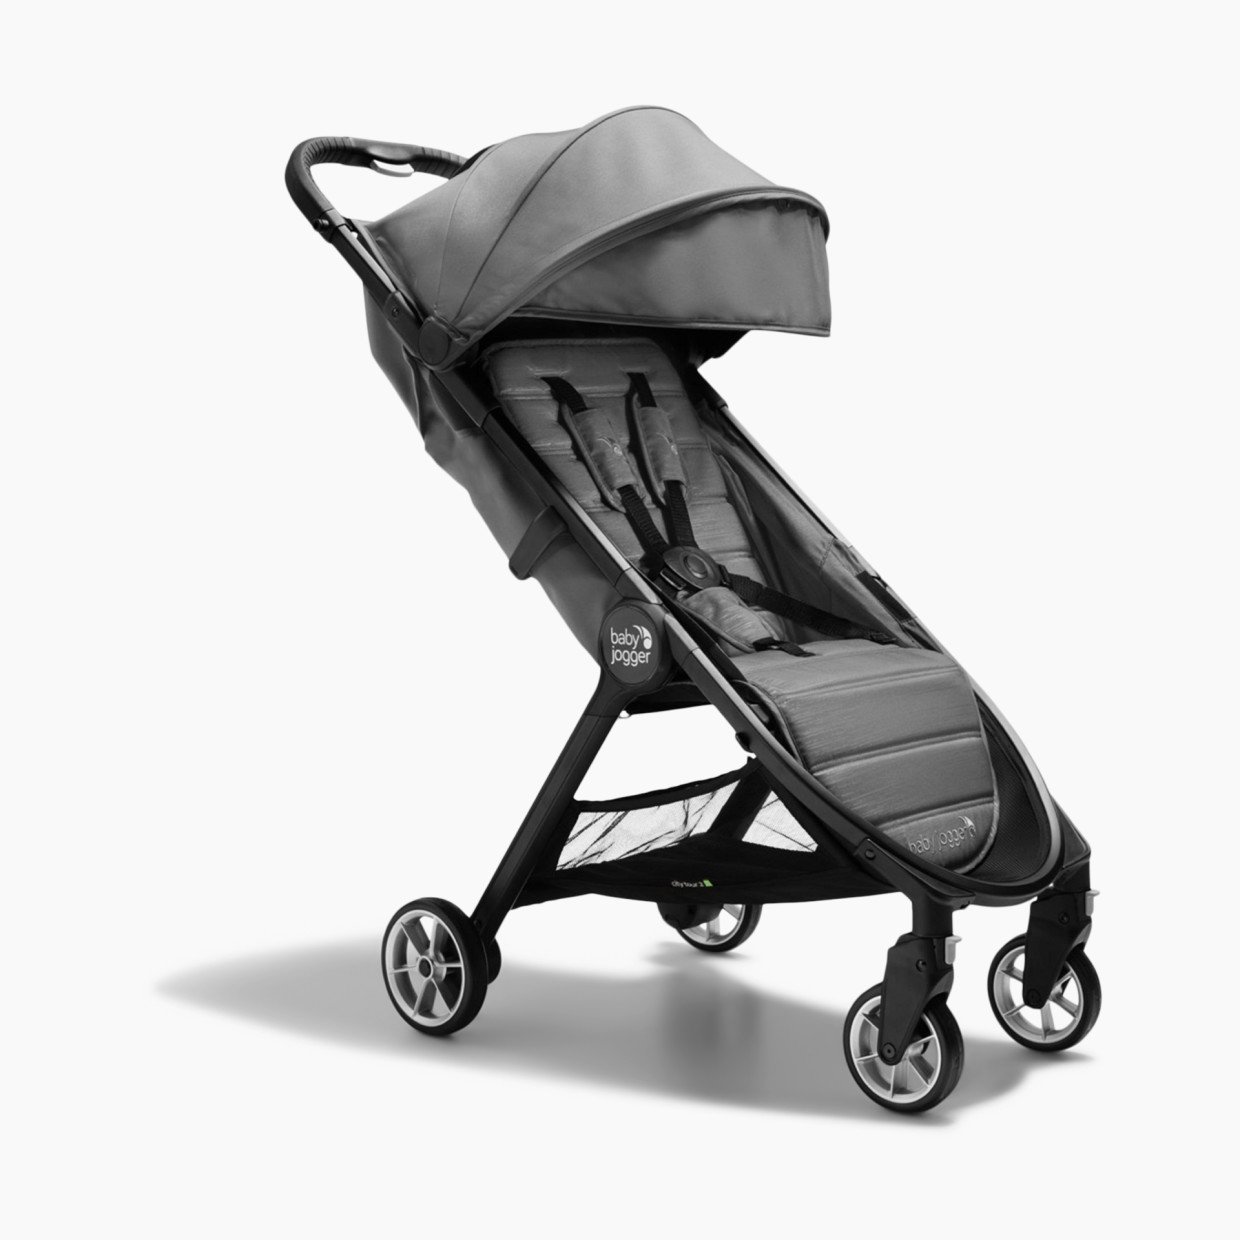 Baby Jogger City Tour 2 Ultra-Compact Travel Stroller - Shadow Grey.